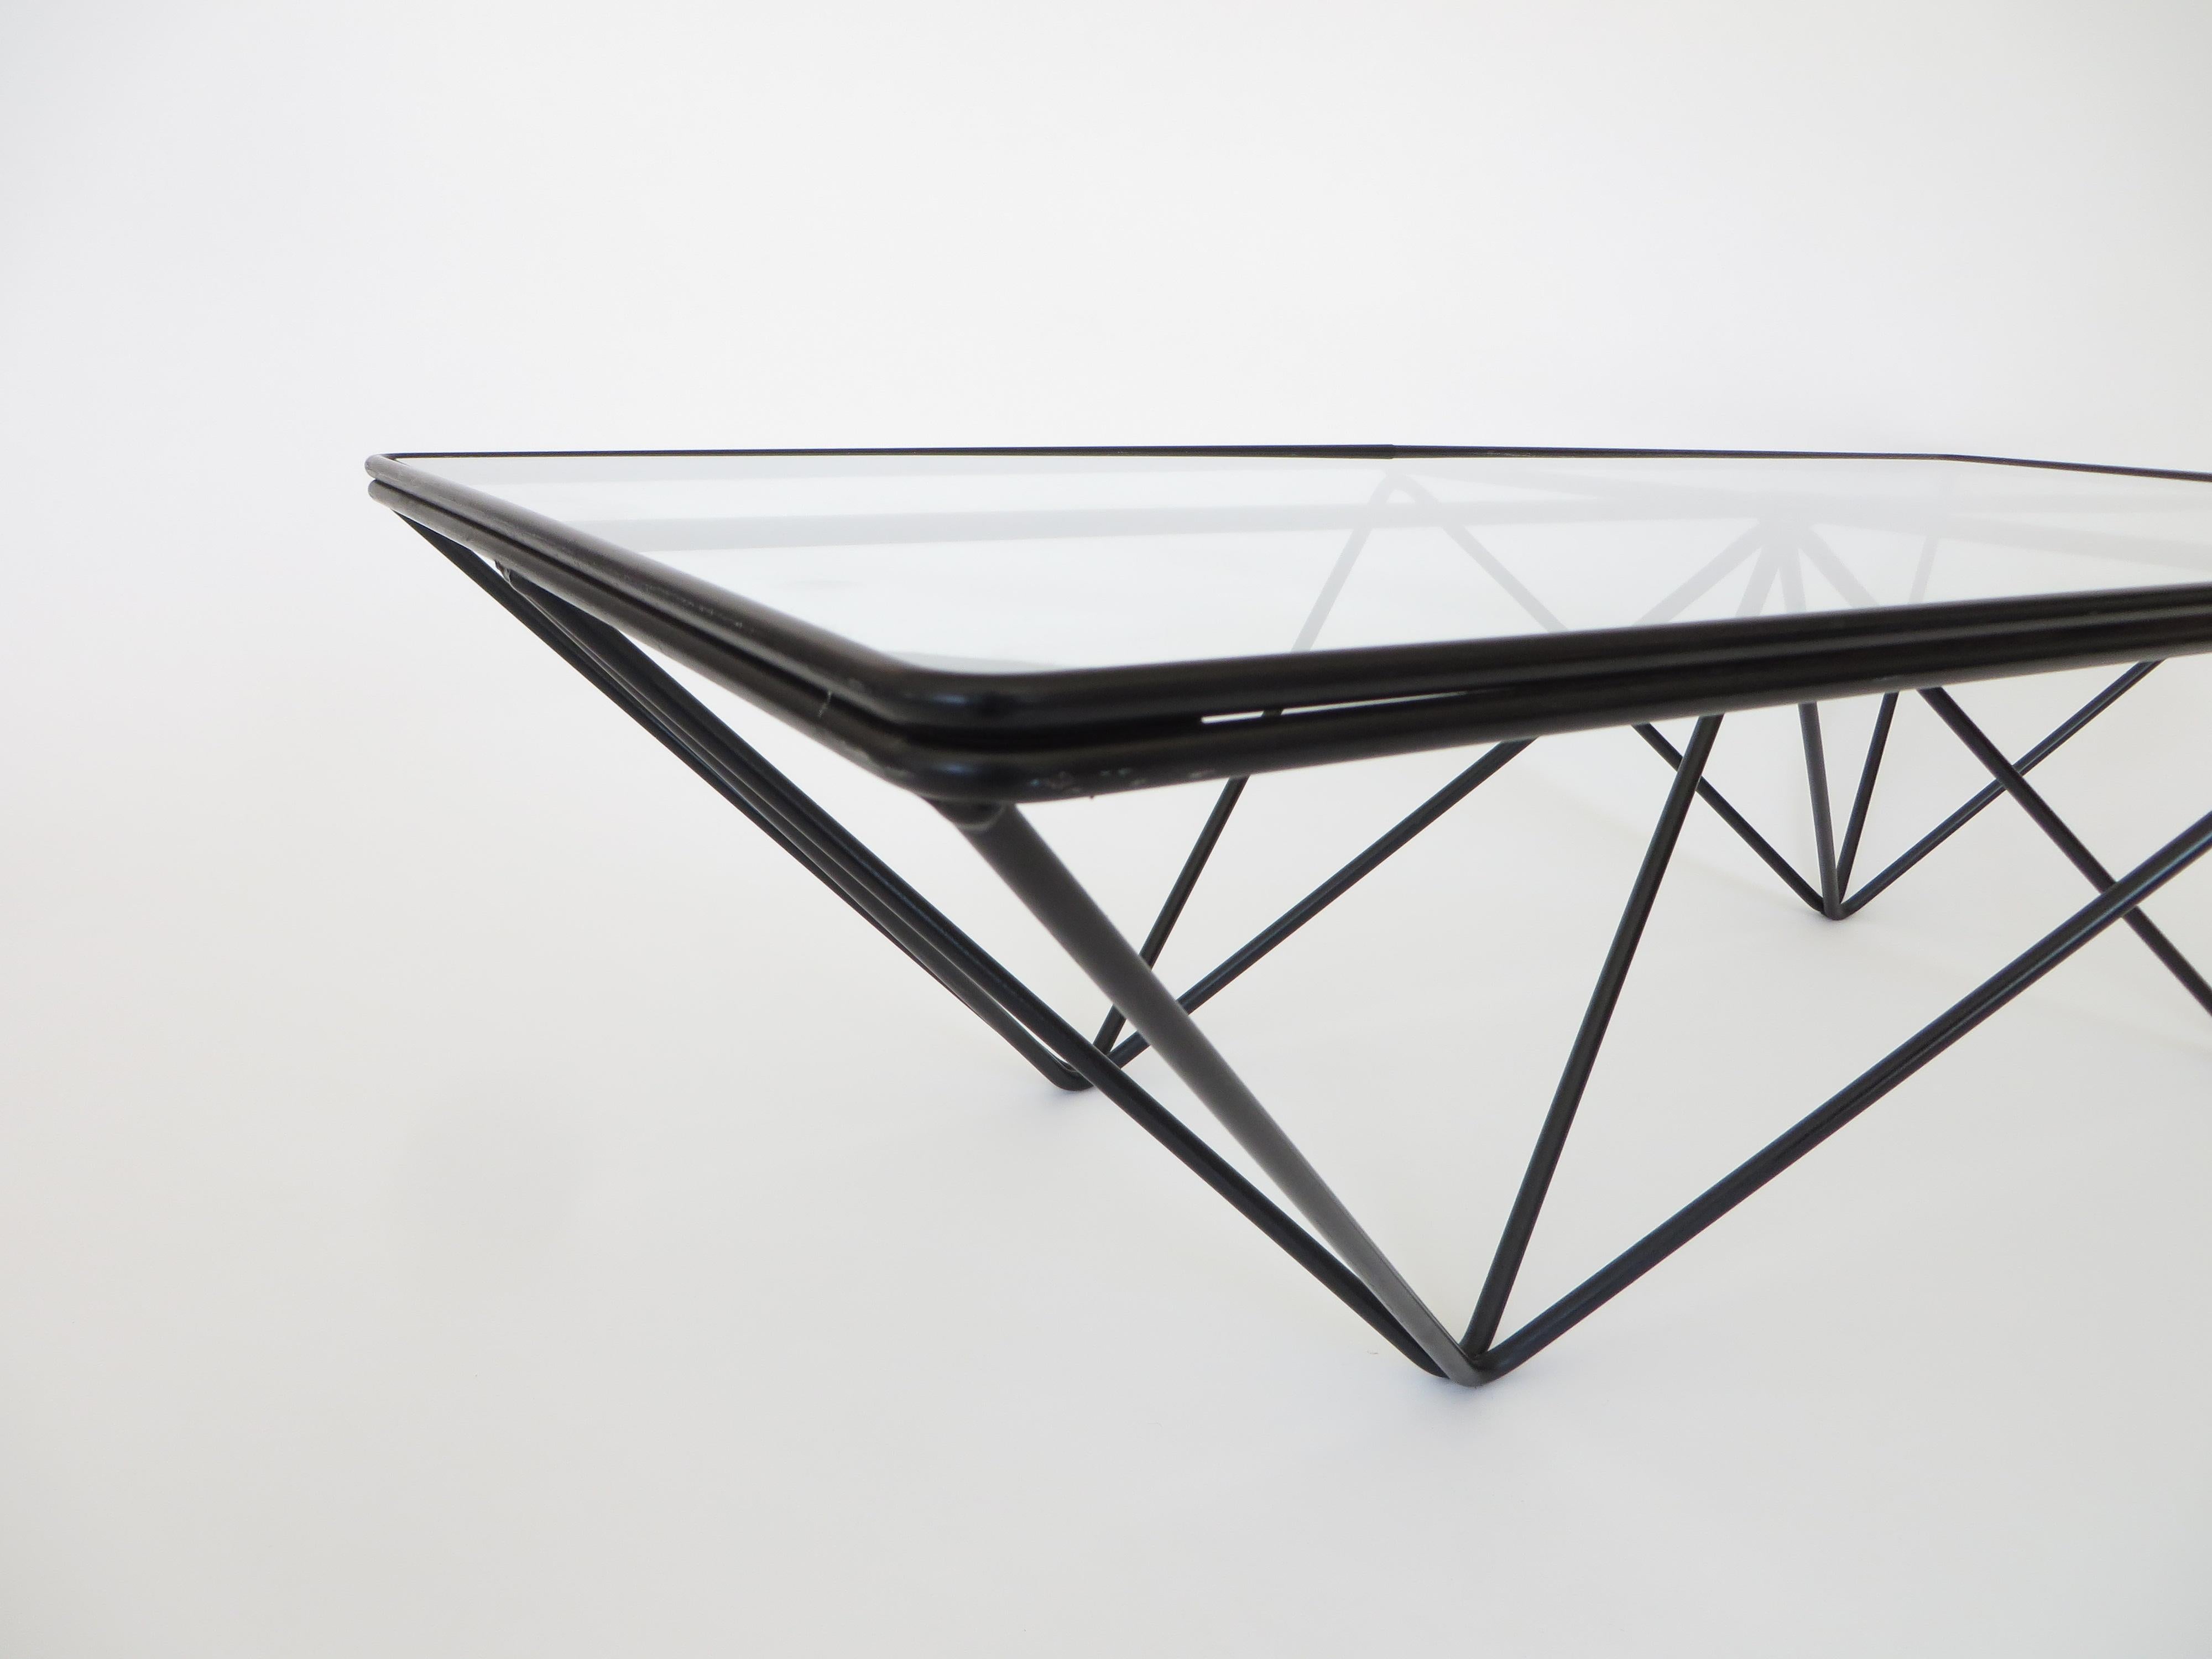 Black Steel and Glass Coffee Table in The Style of Paolo Piva Alanda Table  4